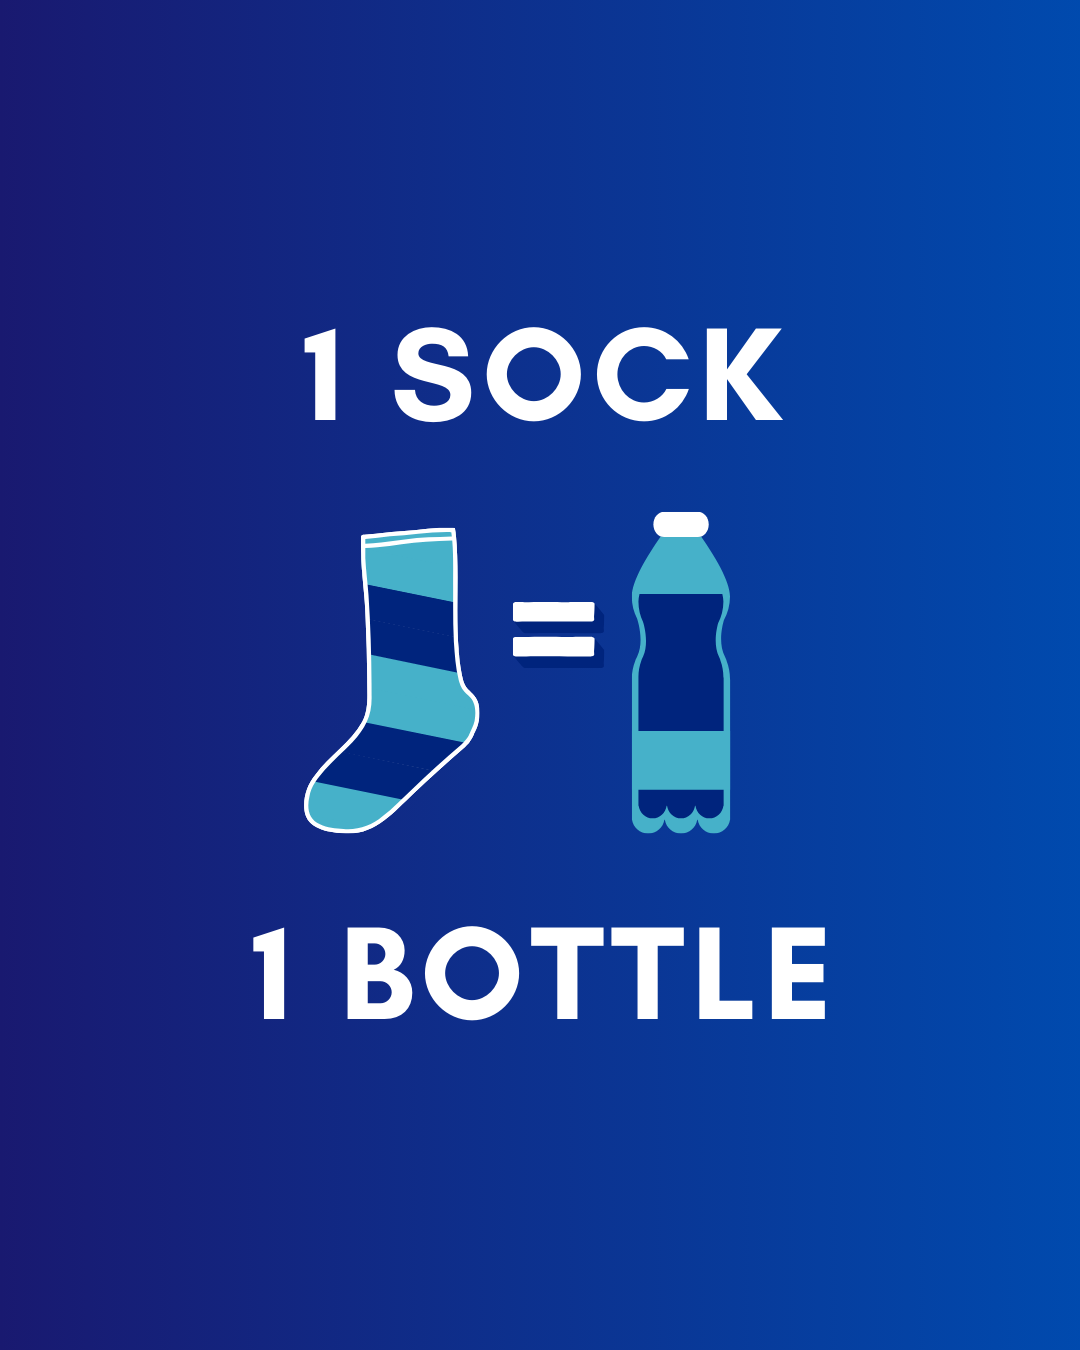 Ecofriendly socks made from REPREVE recycled polyester